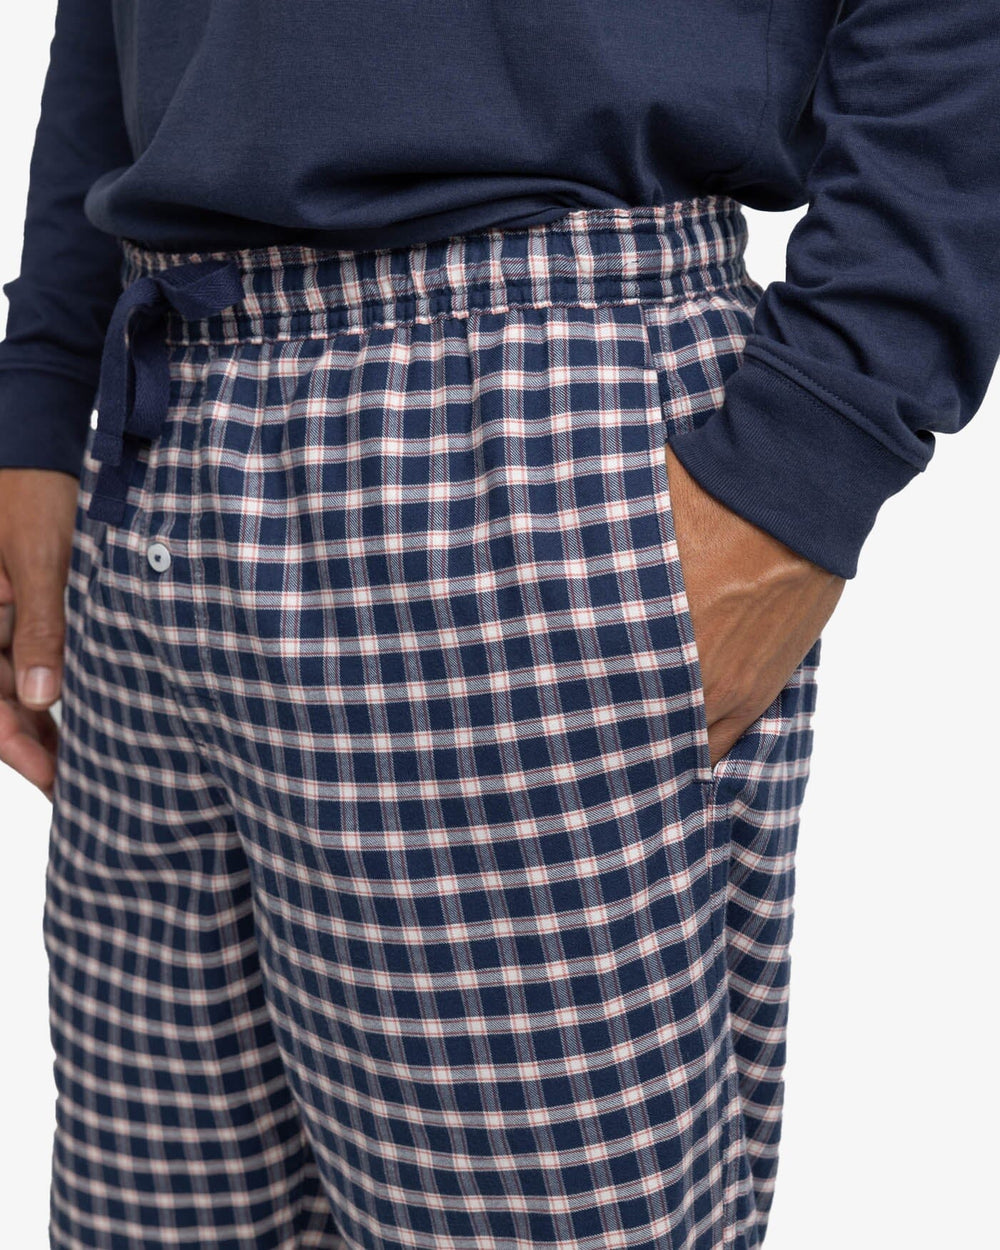 The detail view of the Southern Tide Silverleaf Plaid Lounge Pant by Southern Tide - Dress Blue